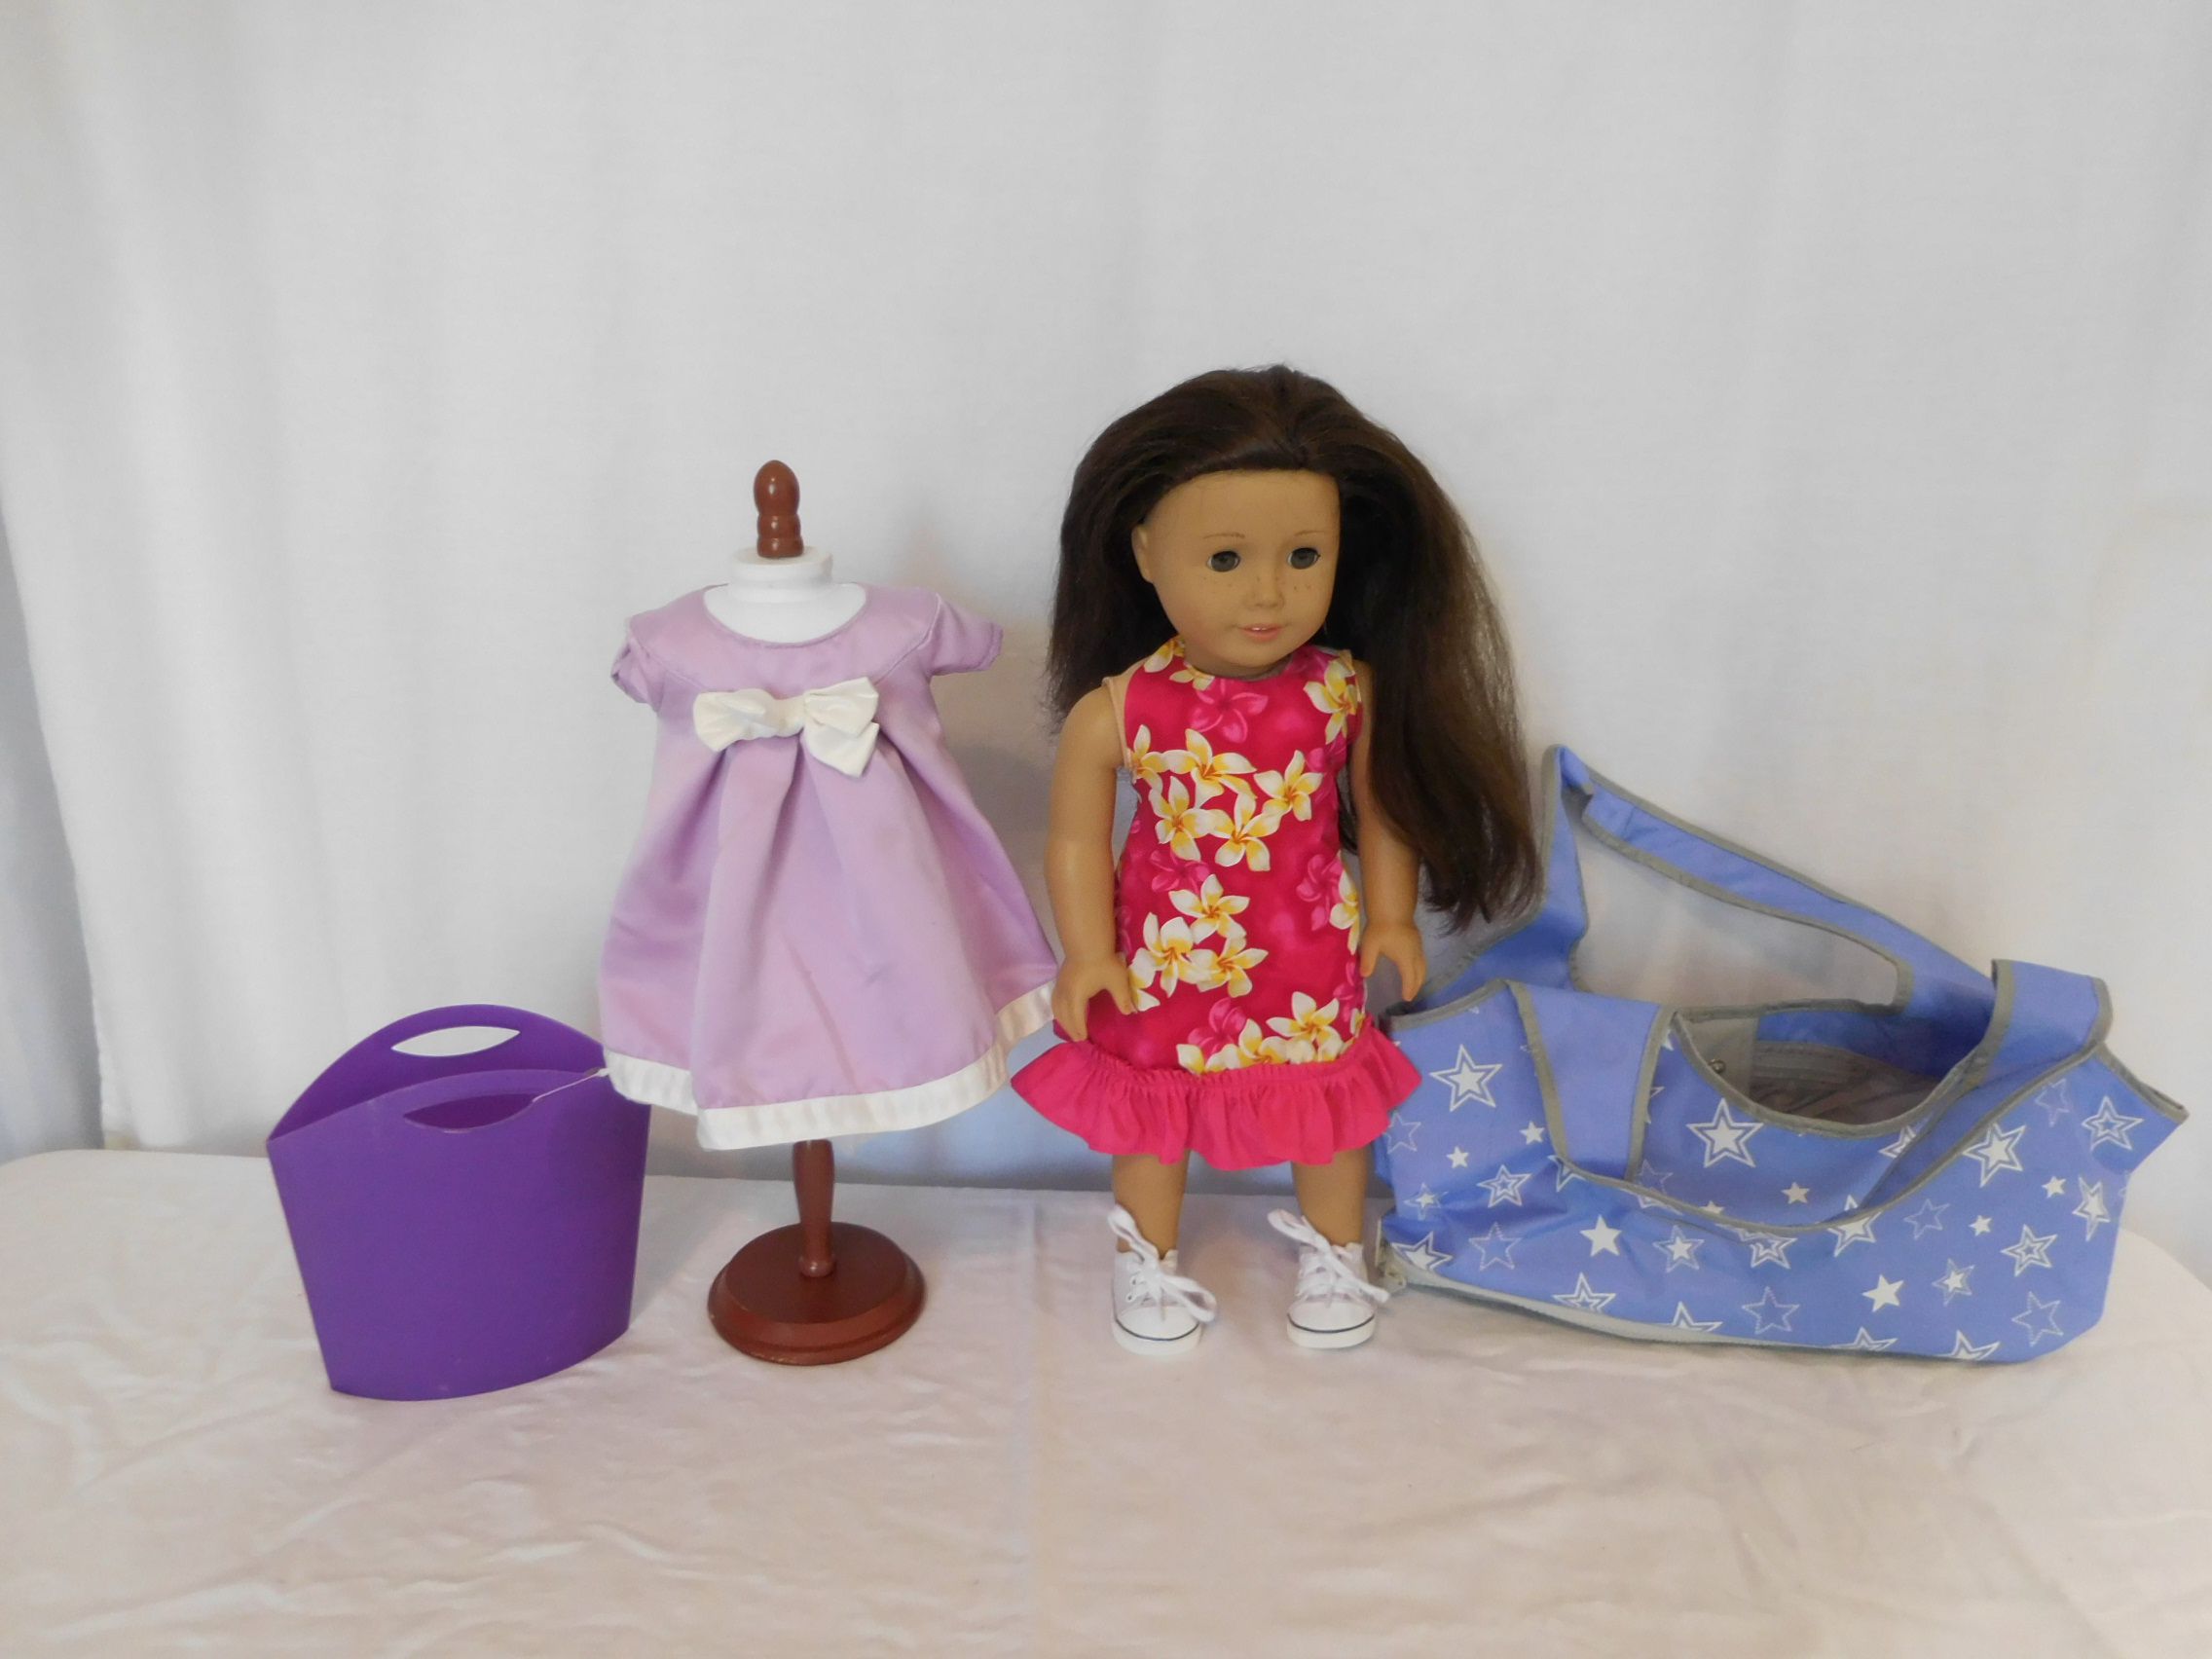 American Girl 18 inch Truly Me Doll Brown hair Brown eyes Freckles has mark on Butt see picture + American Girl Doll Carrier Tote Travel case + Non Am